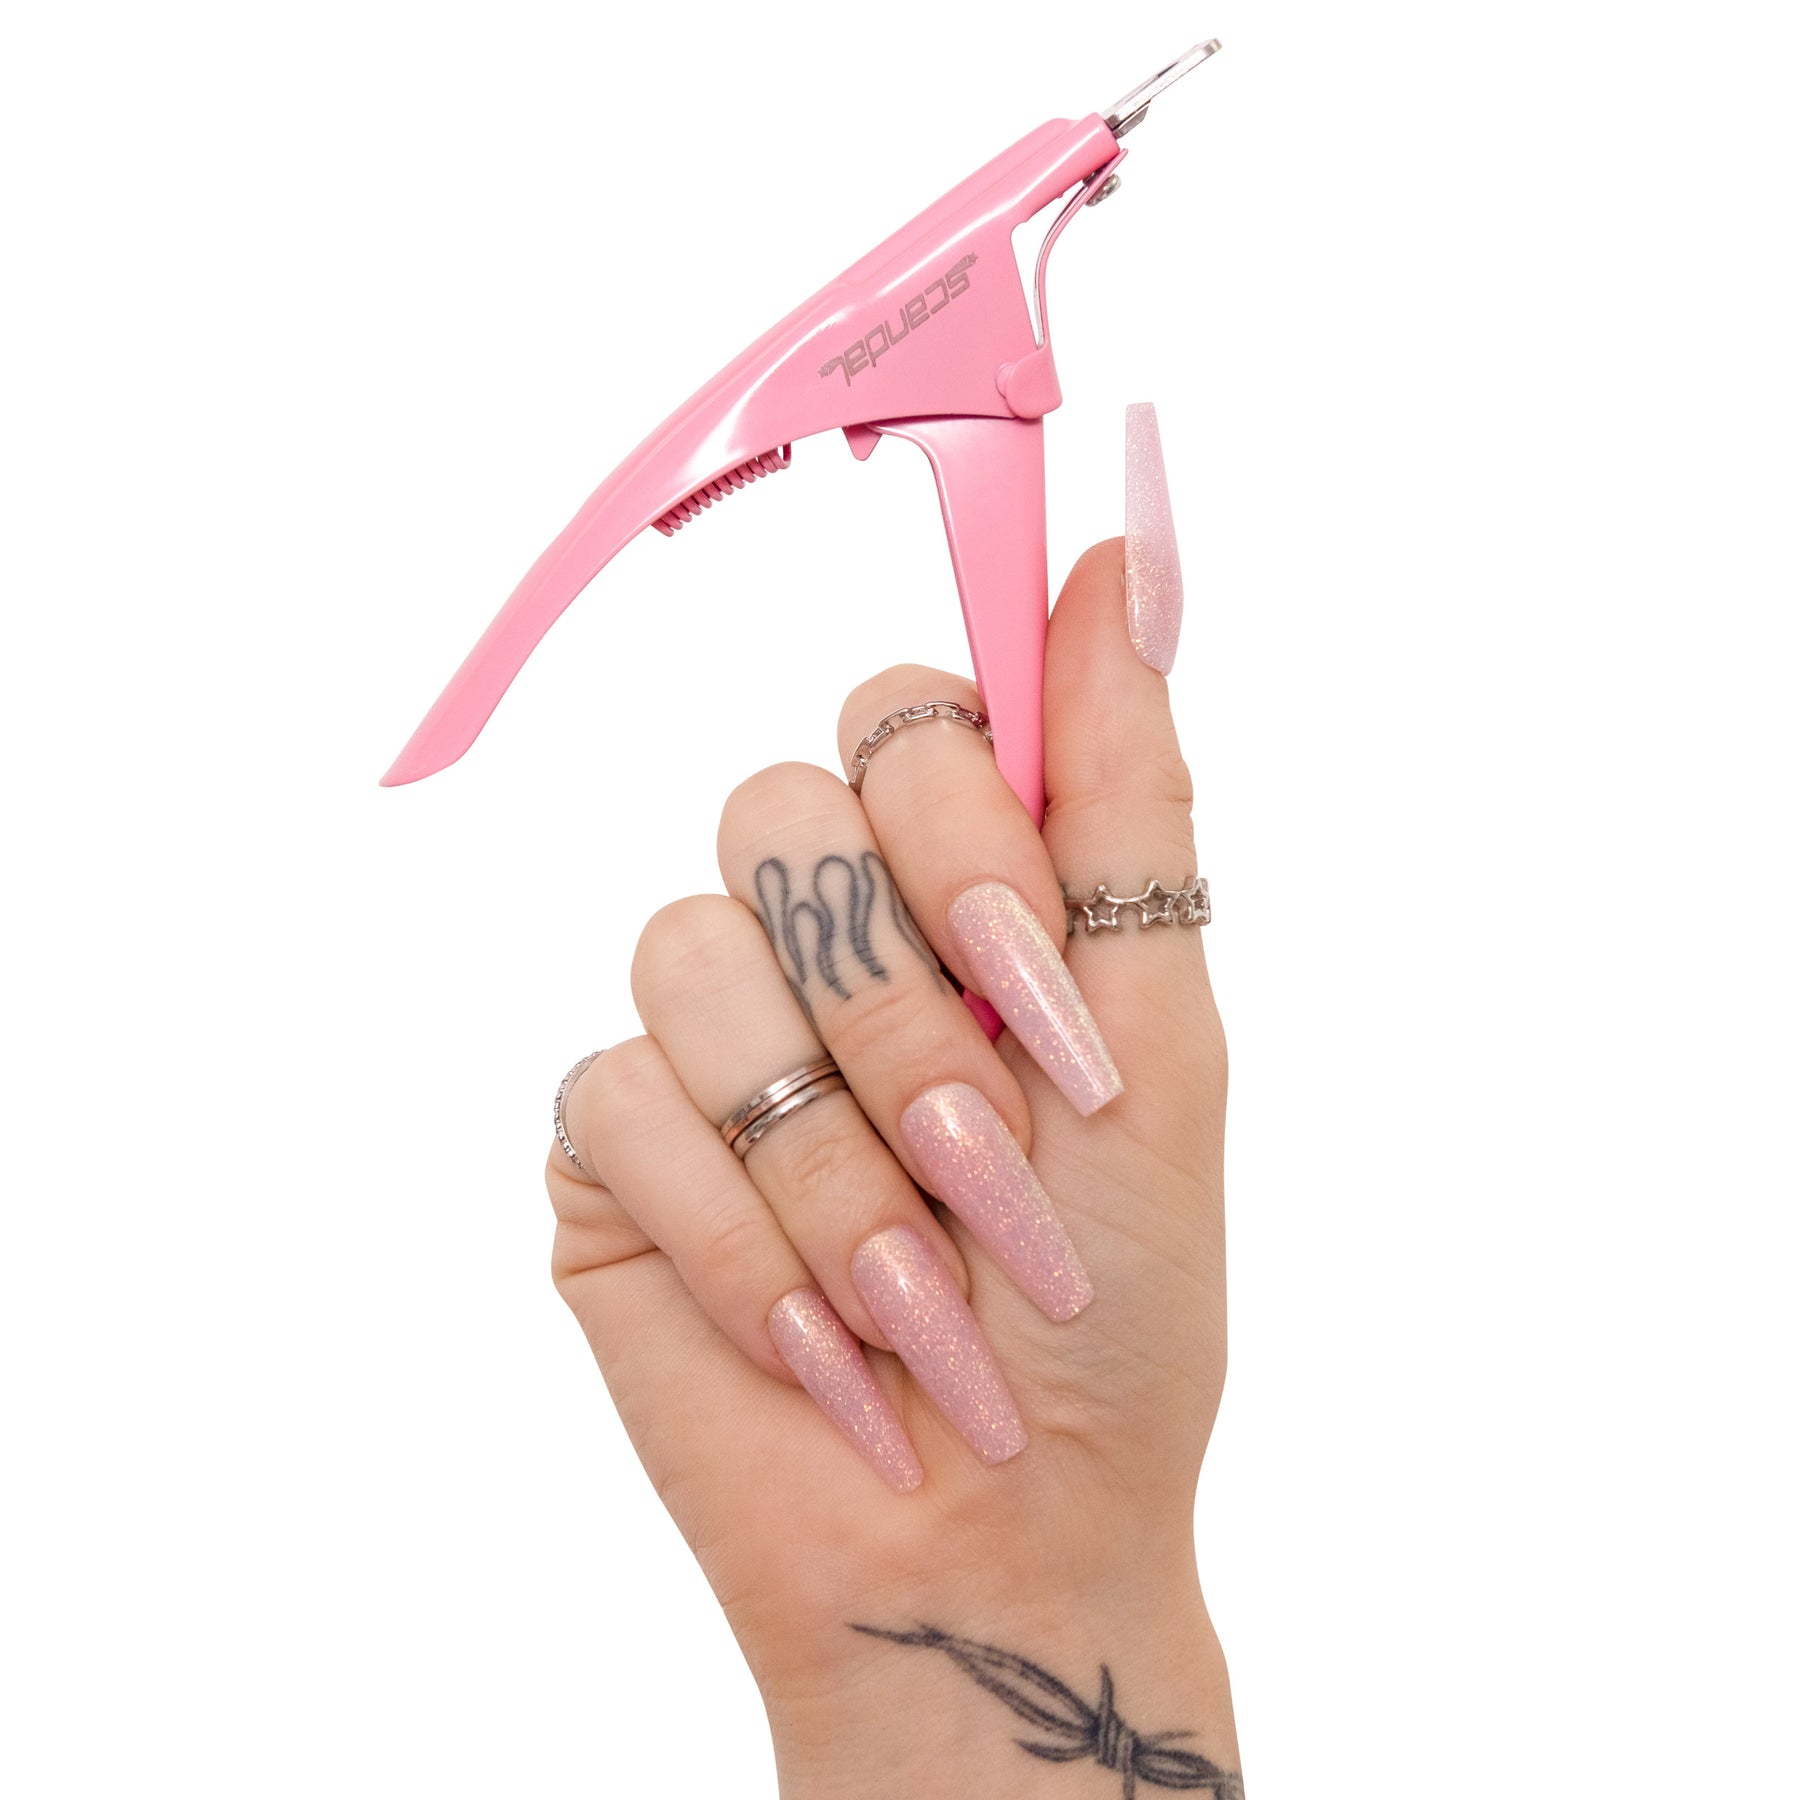 Hand holding pink stainless steel acrylic nail clippers gently and effectively cut artificial nails. Regular nail clippers or scissors may crack, split or damage your press-on nails. Our high quality clippers feature an extremely sharp blade, designed to safely and easily cut the nail tips. 